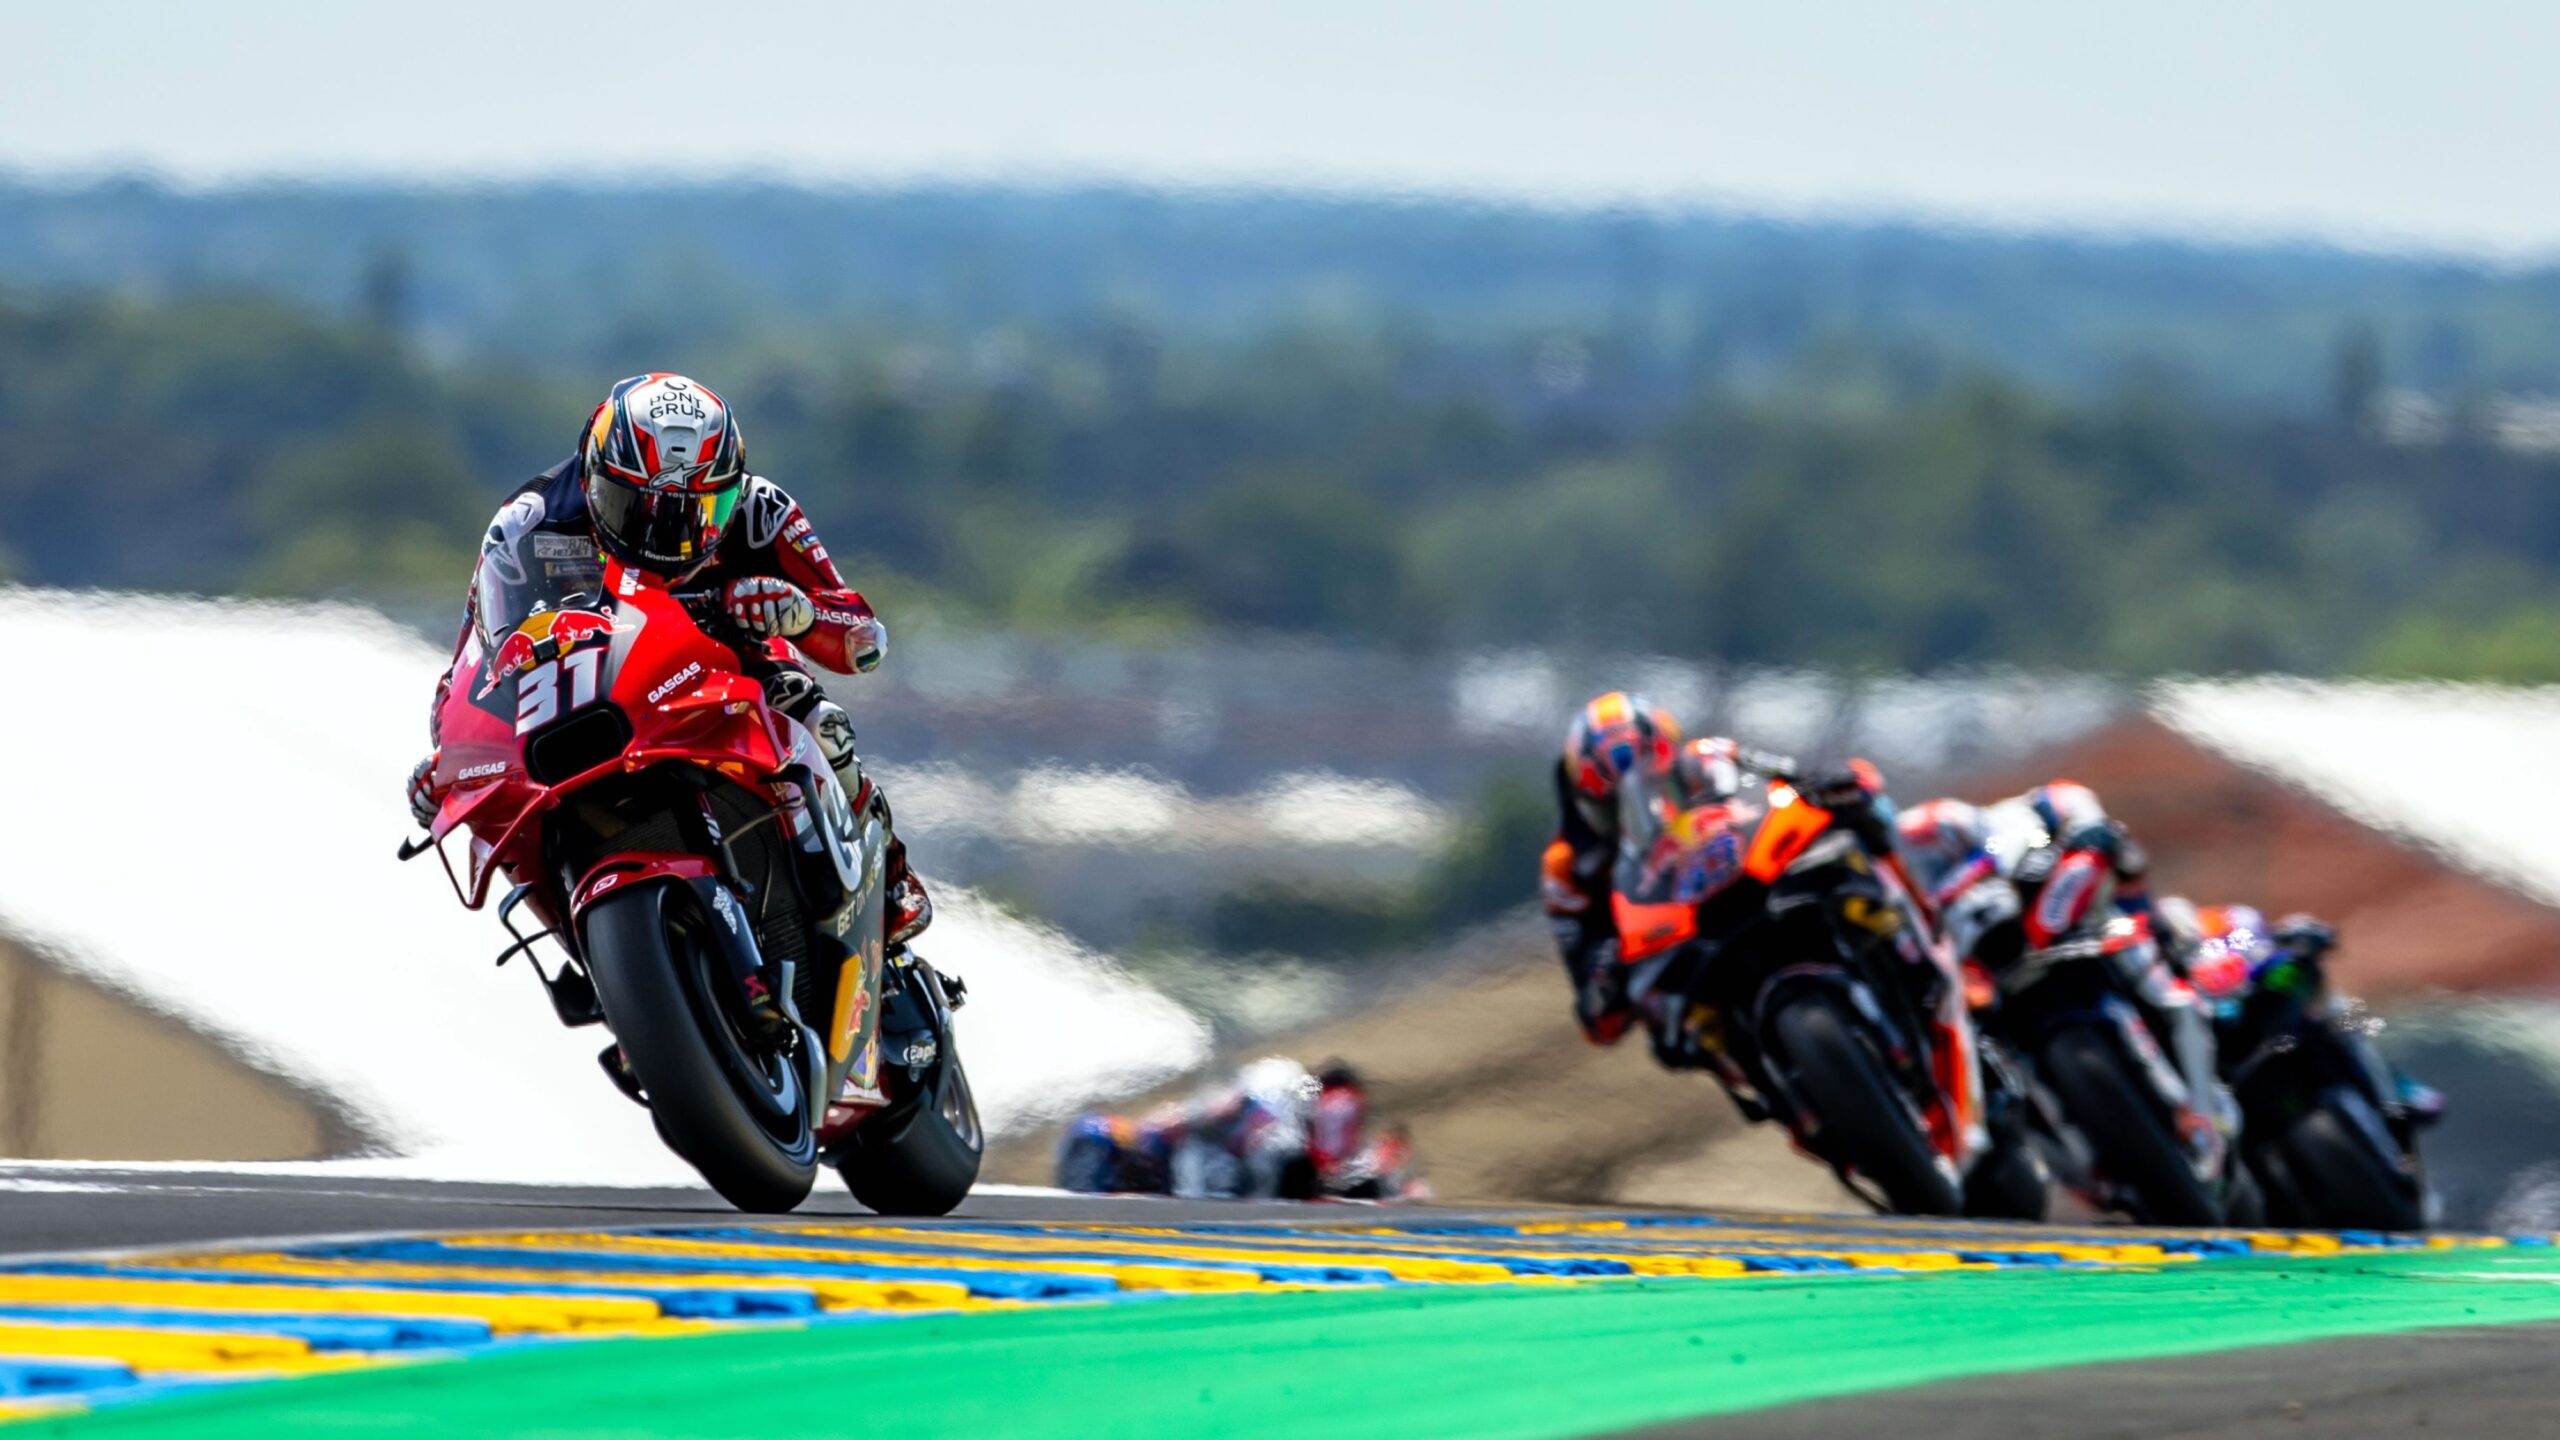 MotoGP France, J2 – Pedro Acosta: “We could have fought for the podium”